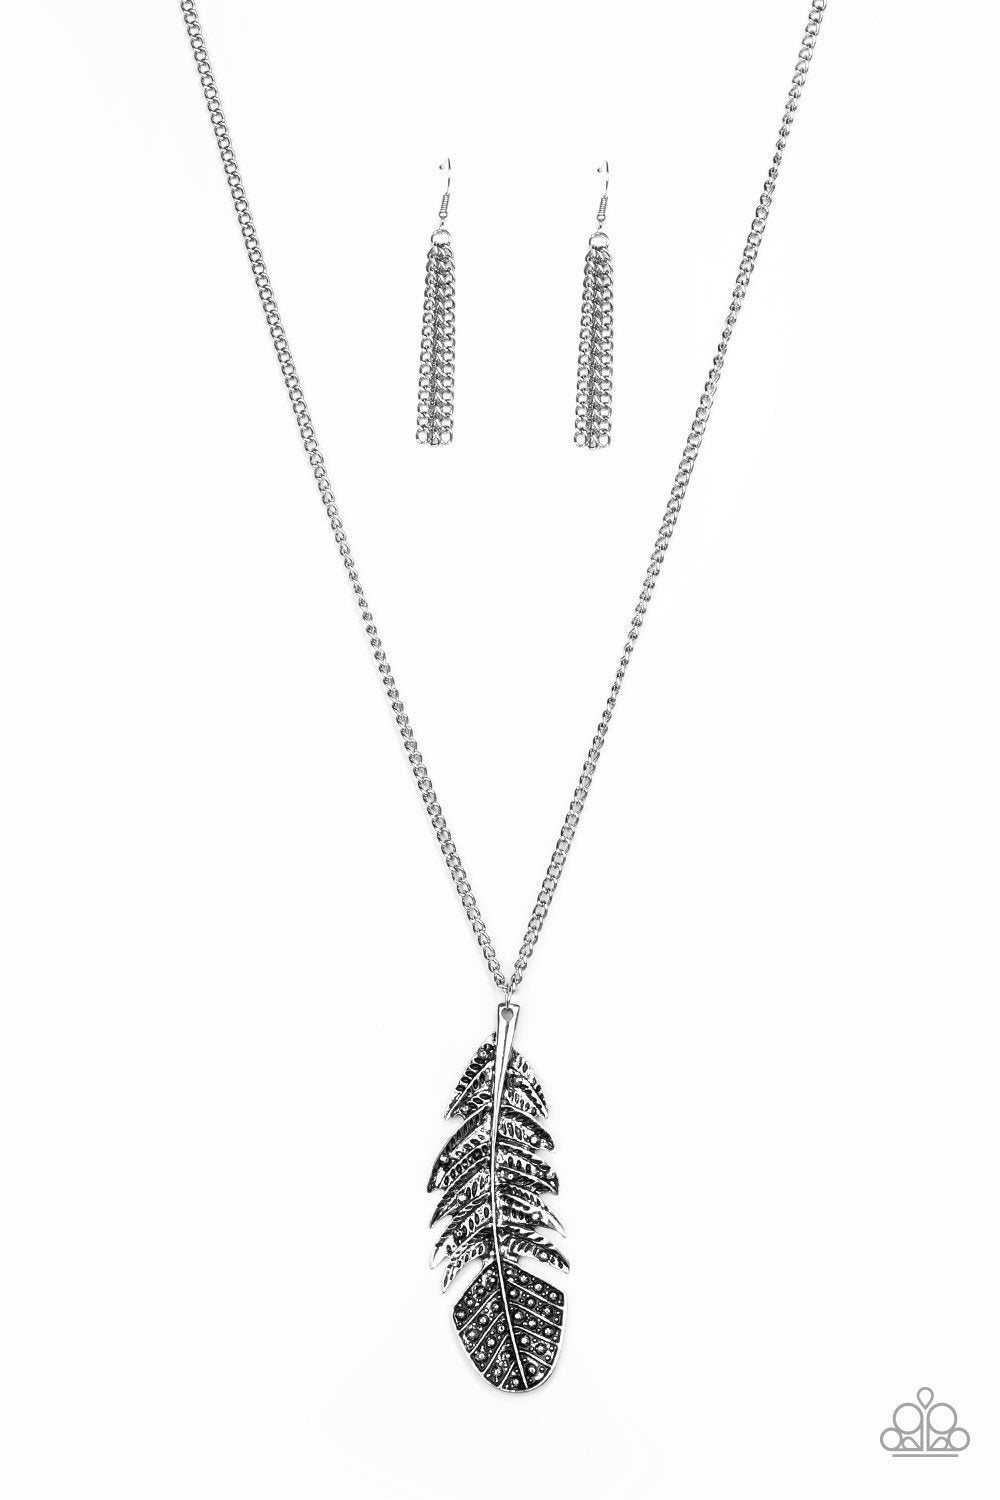 Free Bird Silver Feather Necklace - Paparazzi Accessories-CarasShop.com - $5 Jewelry by Cara Jewels